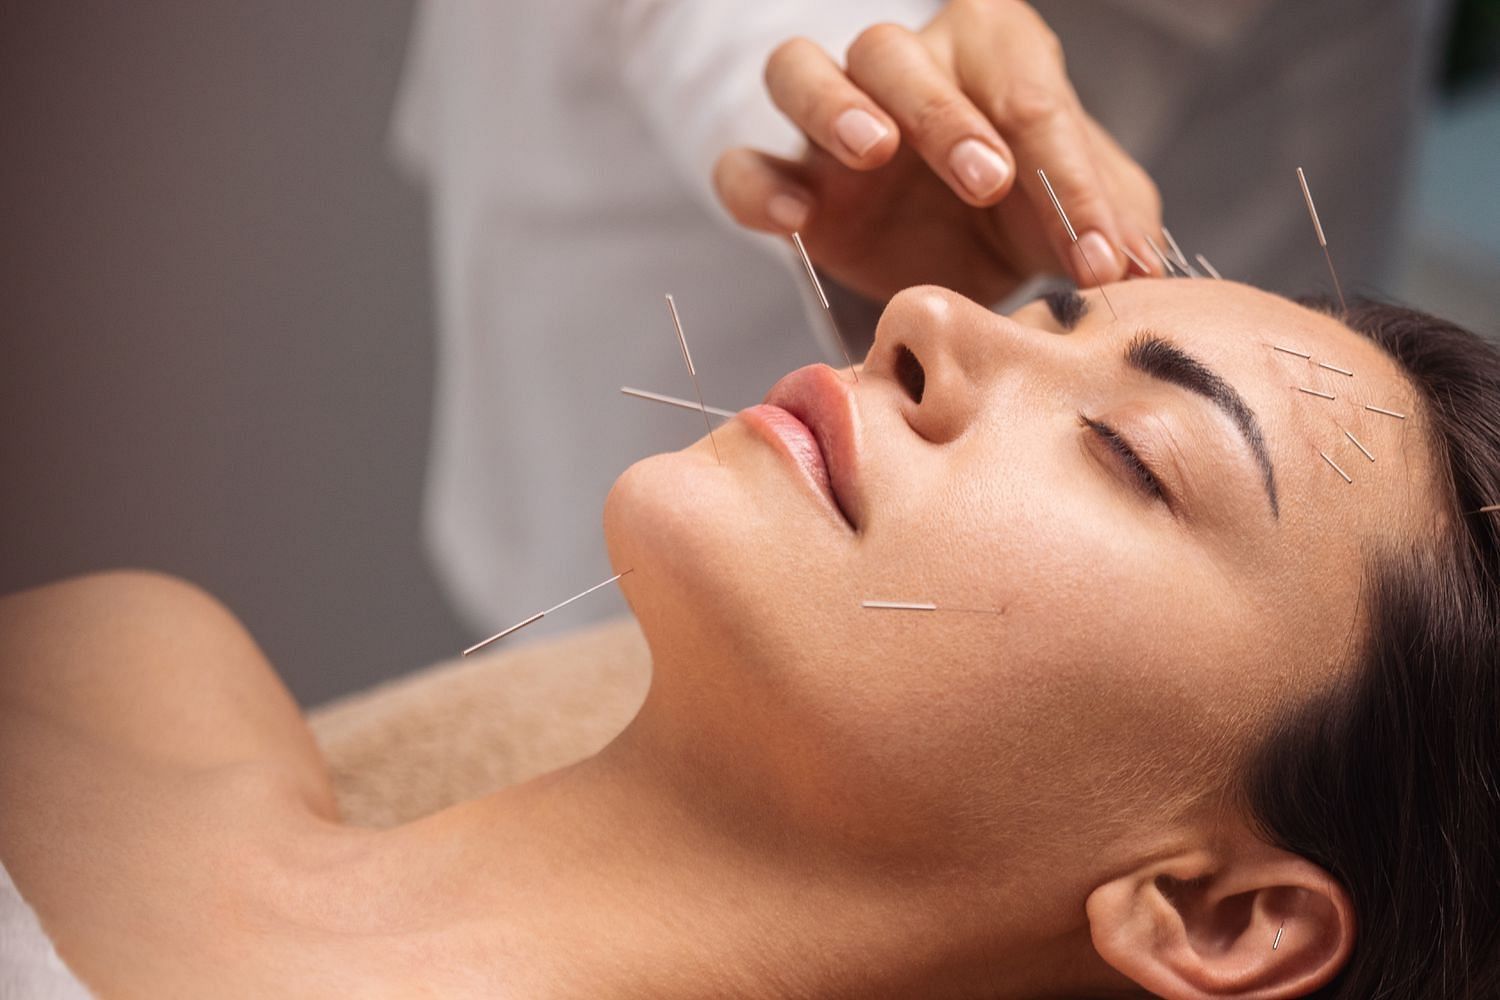 Acupuncturist performing the method on a patient (Image via Getty Images)